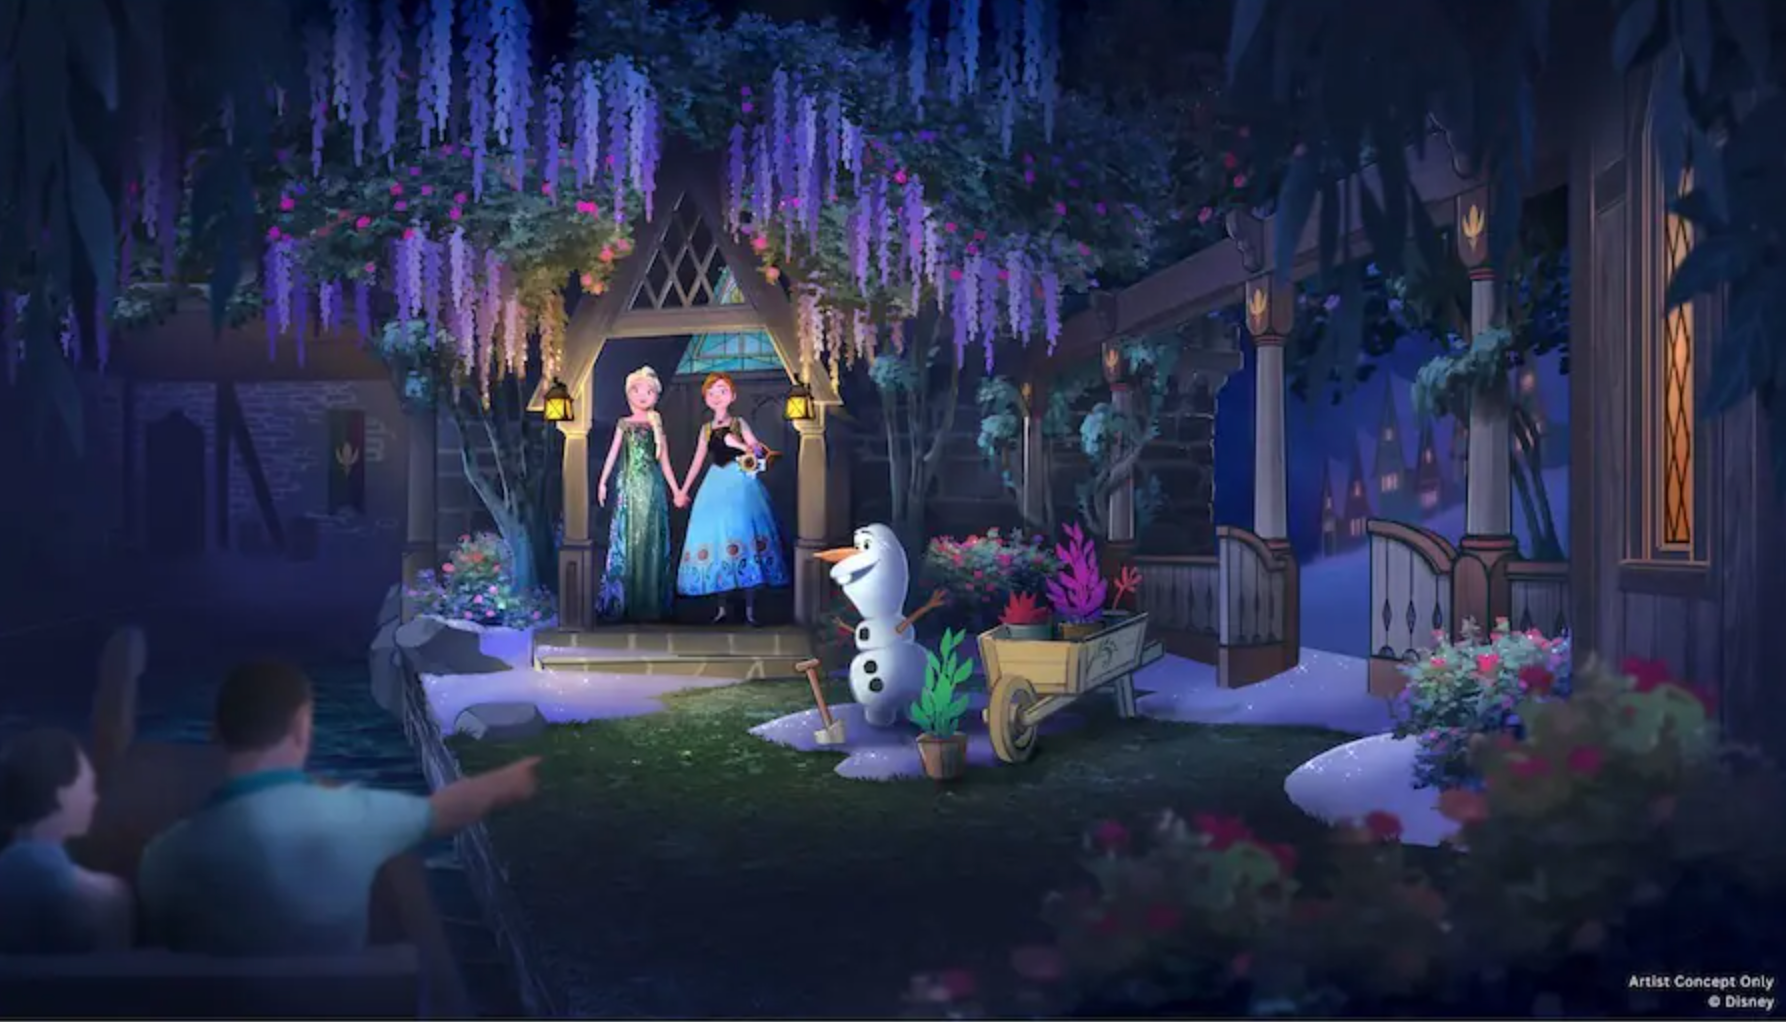 Disney Execs Hint That 'Frozen' Could Be Featured in Future Park